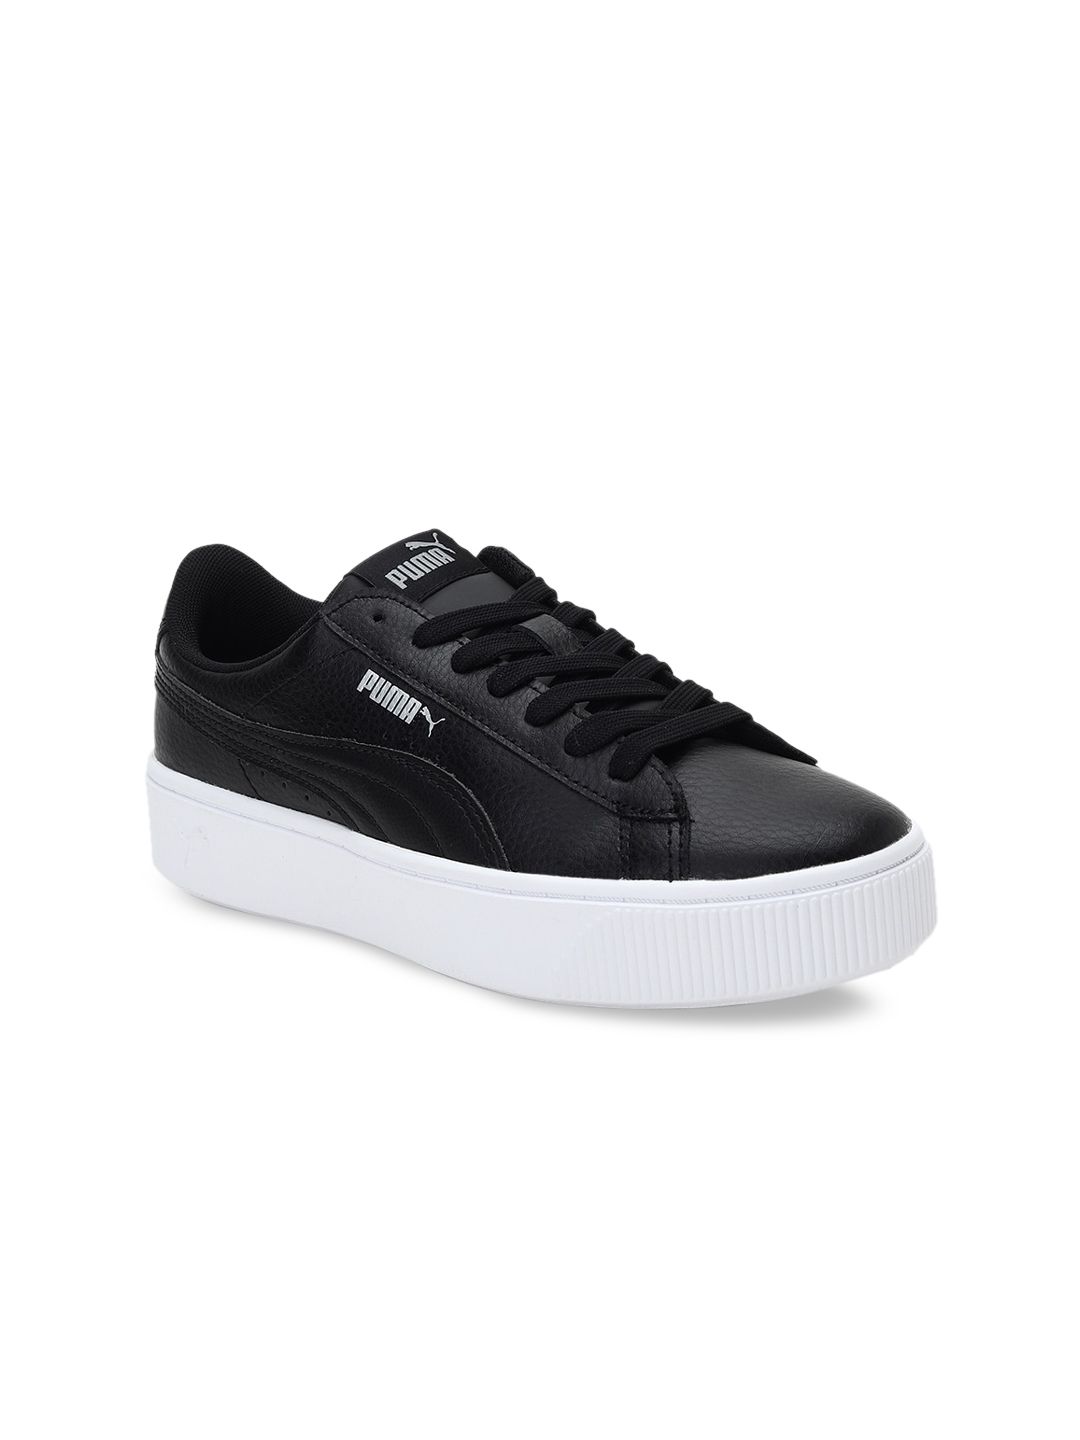 Puma Women Black Vikky Stacked L Sneakers Price in India